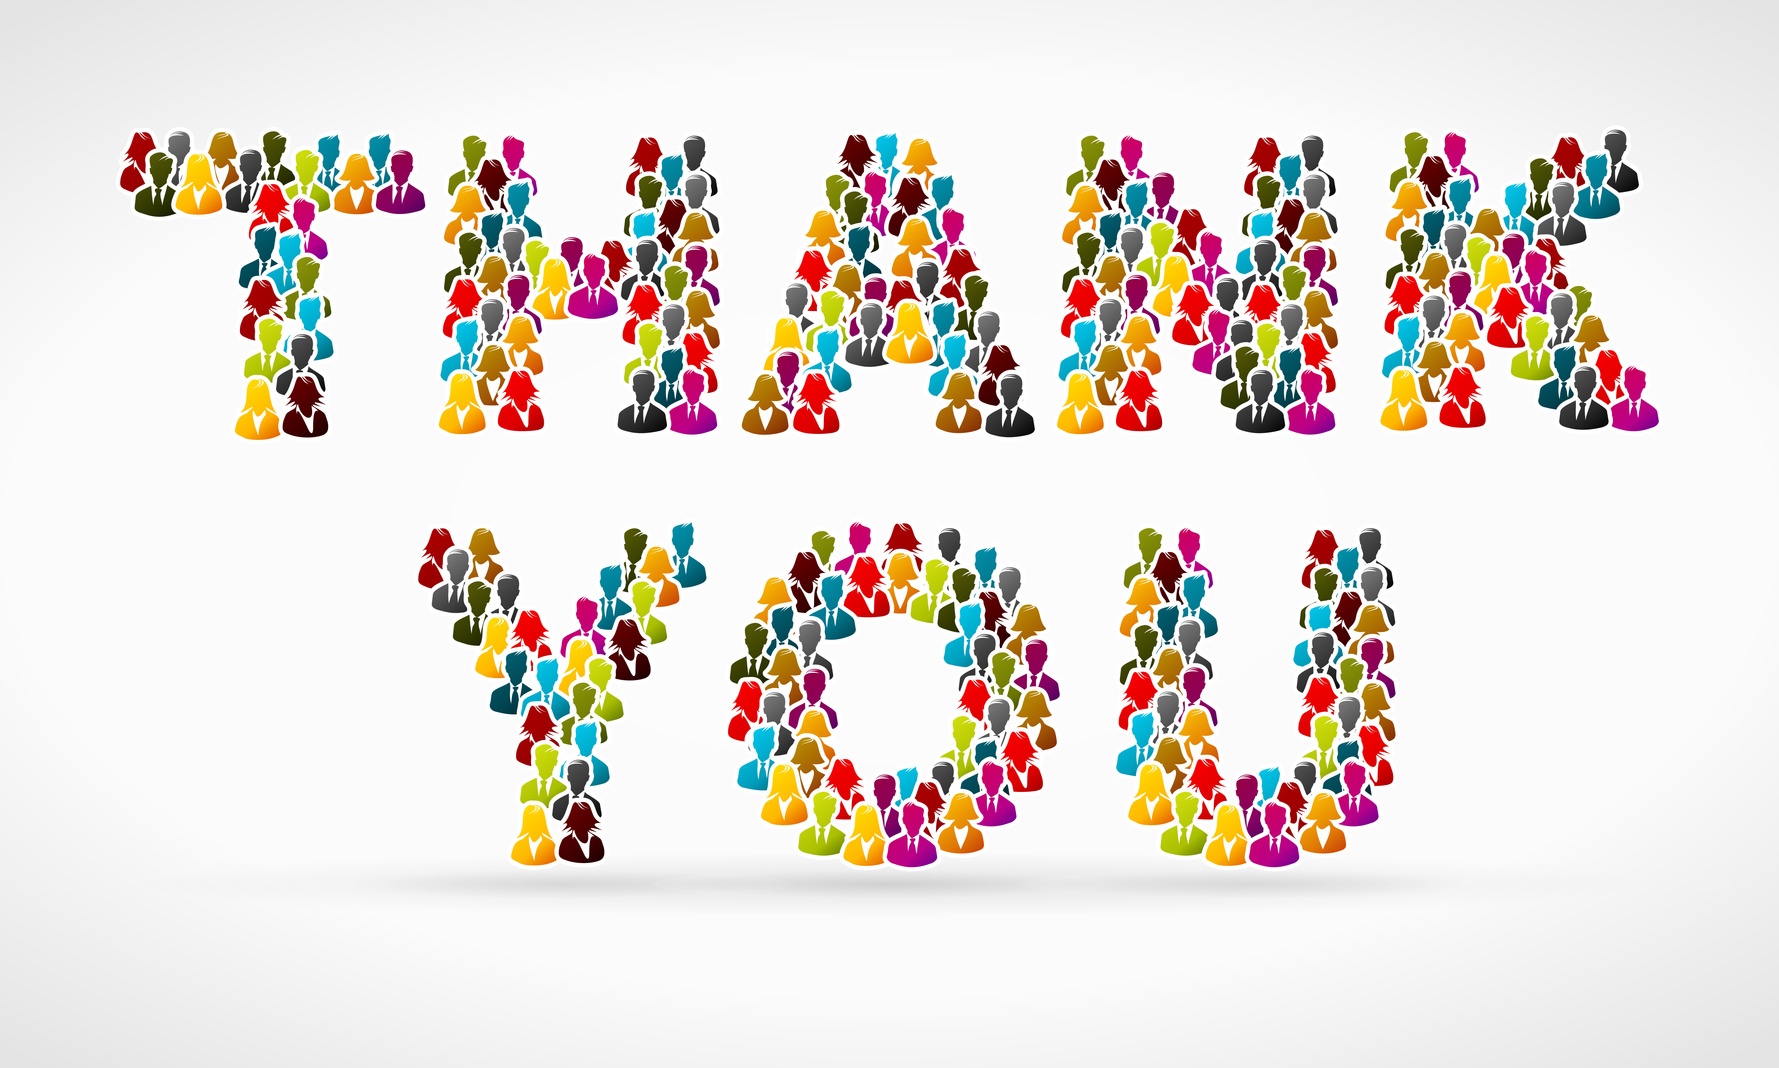 Is Your Thank You Campaign Thanking All the Right People?